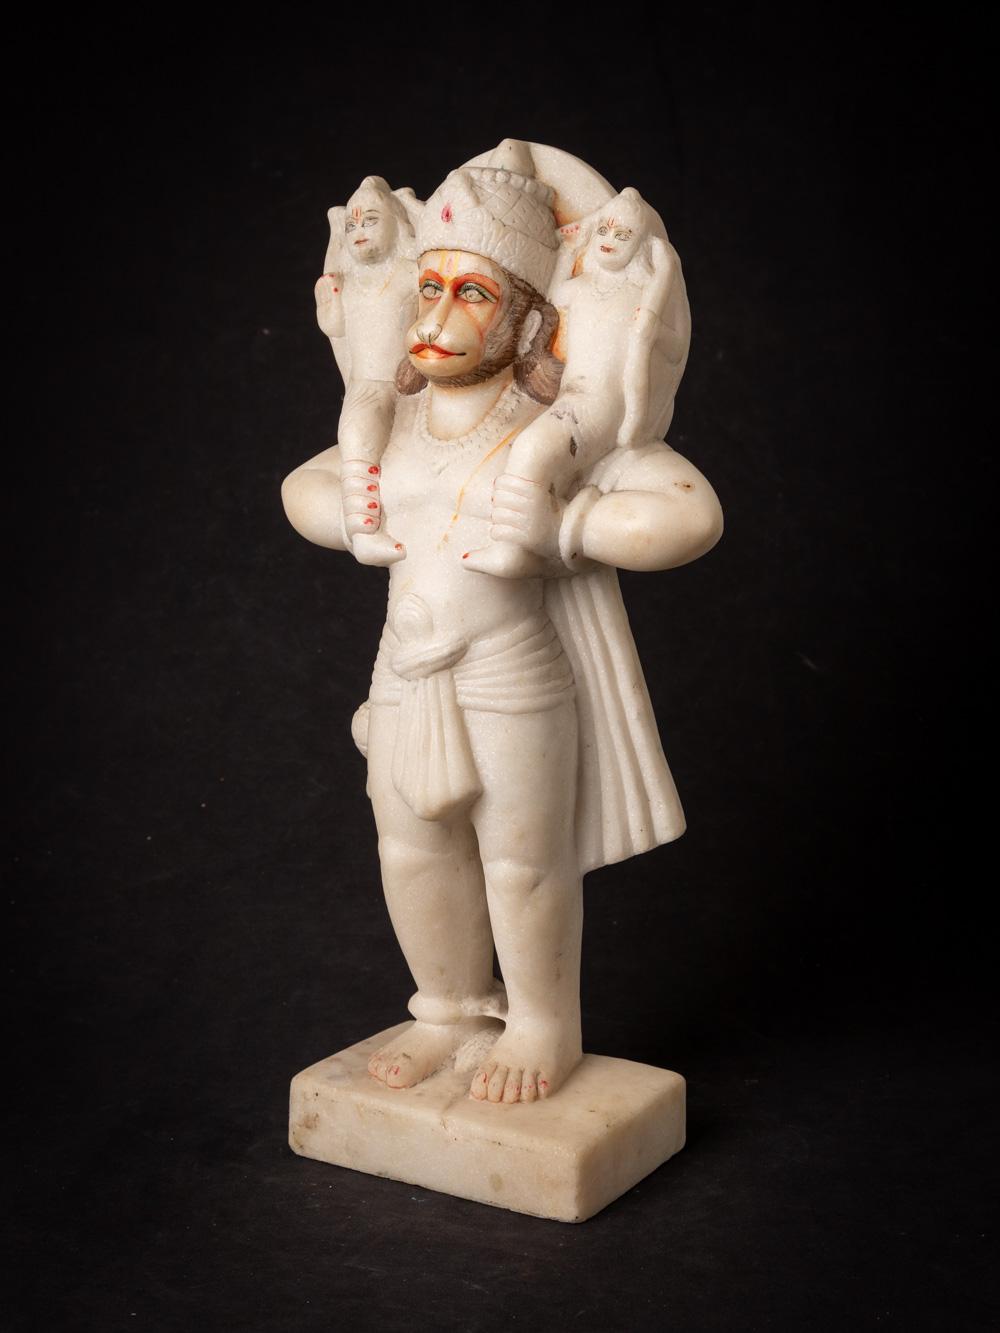 This old marble Hanuman statue is a remarkable piece of art and cultural heritage. It is crafted from marble and stands at a height of 45 cm, with dimensions of 22.5 cm in width and 10 cm in depth. This statue is believed to date back to the middle